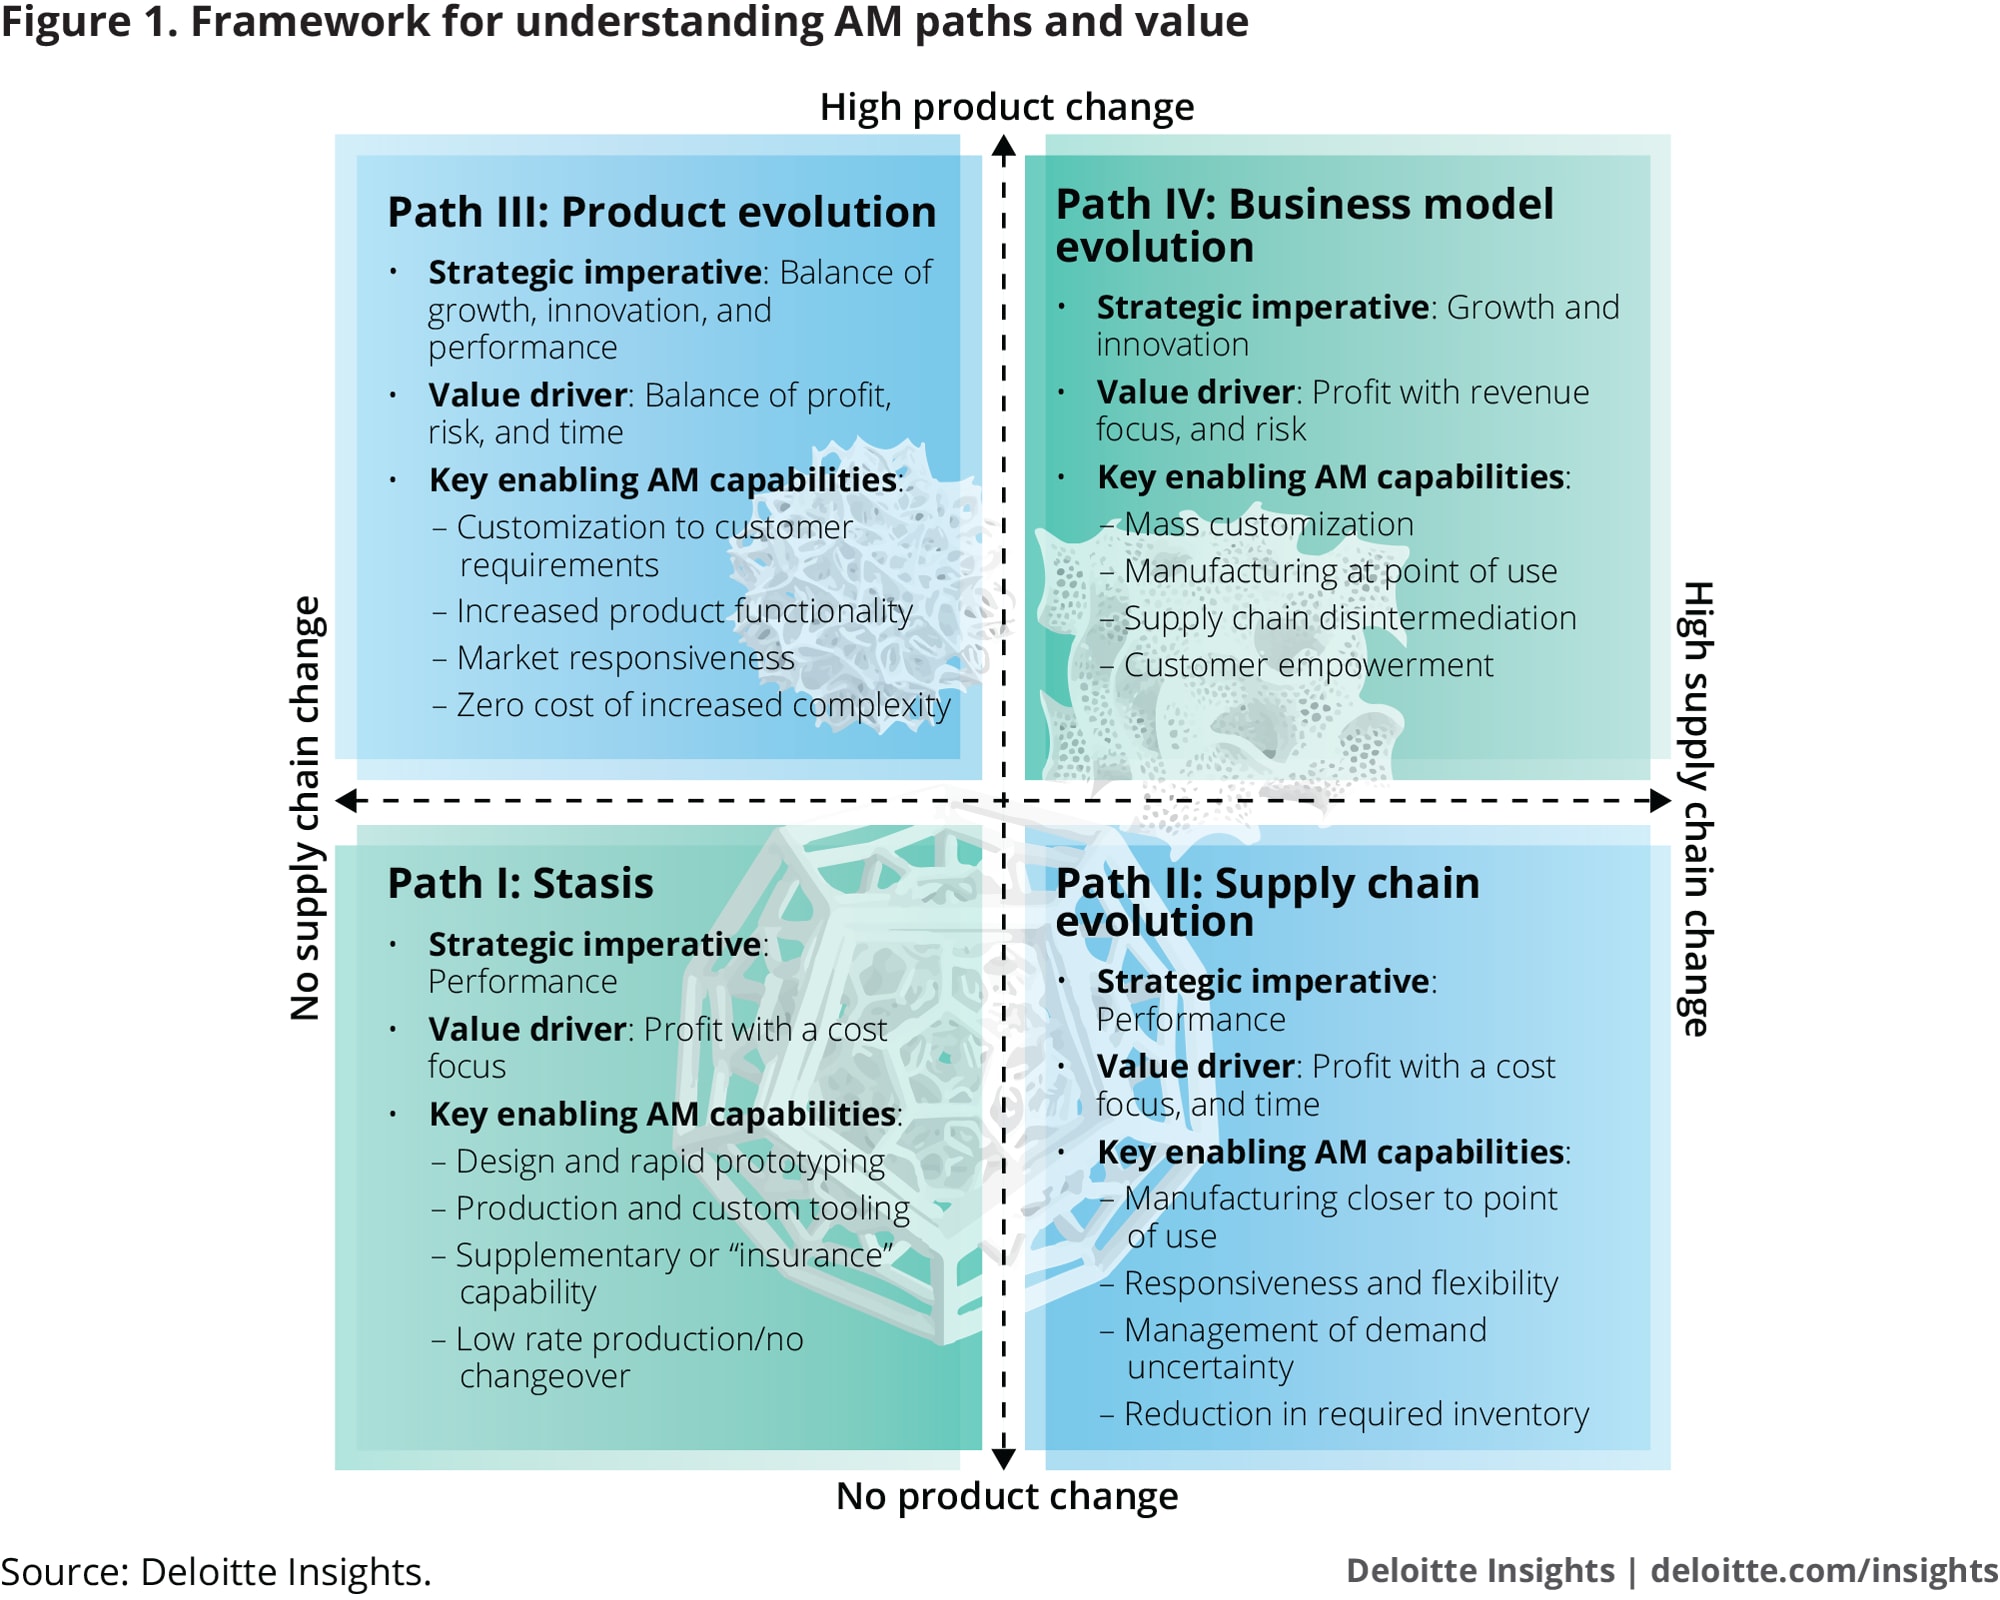 Framework for understanding AM paths and value